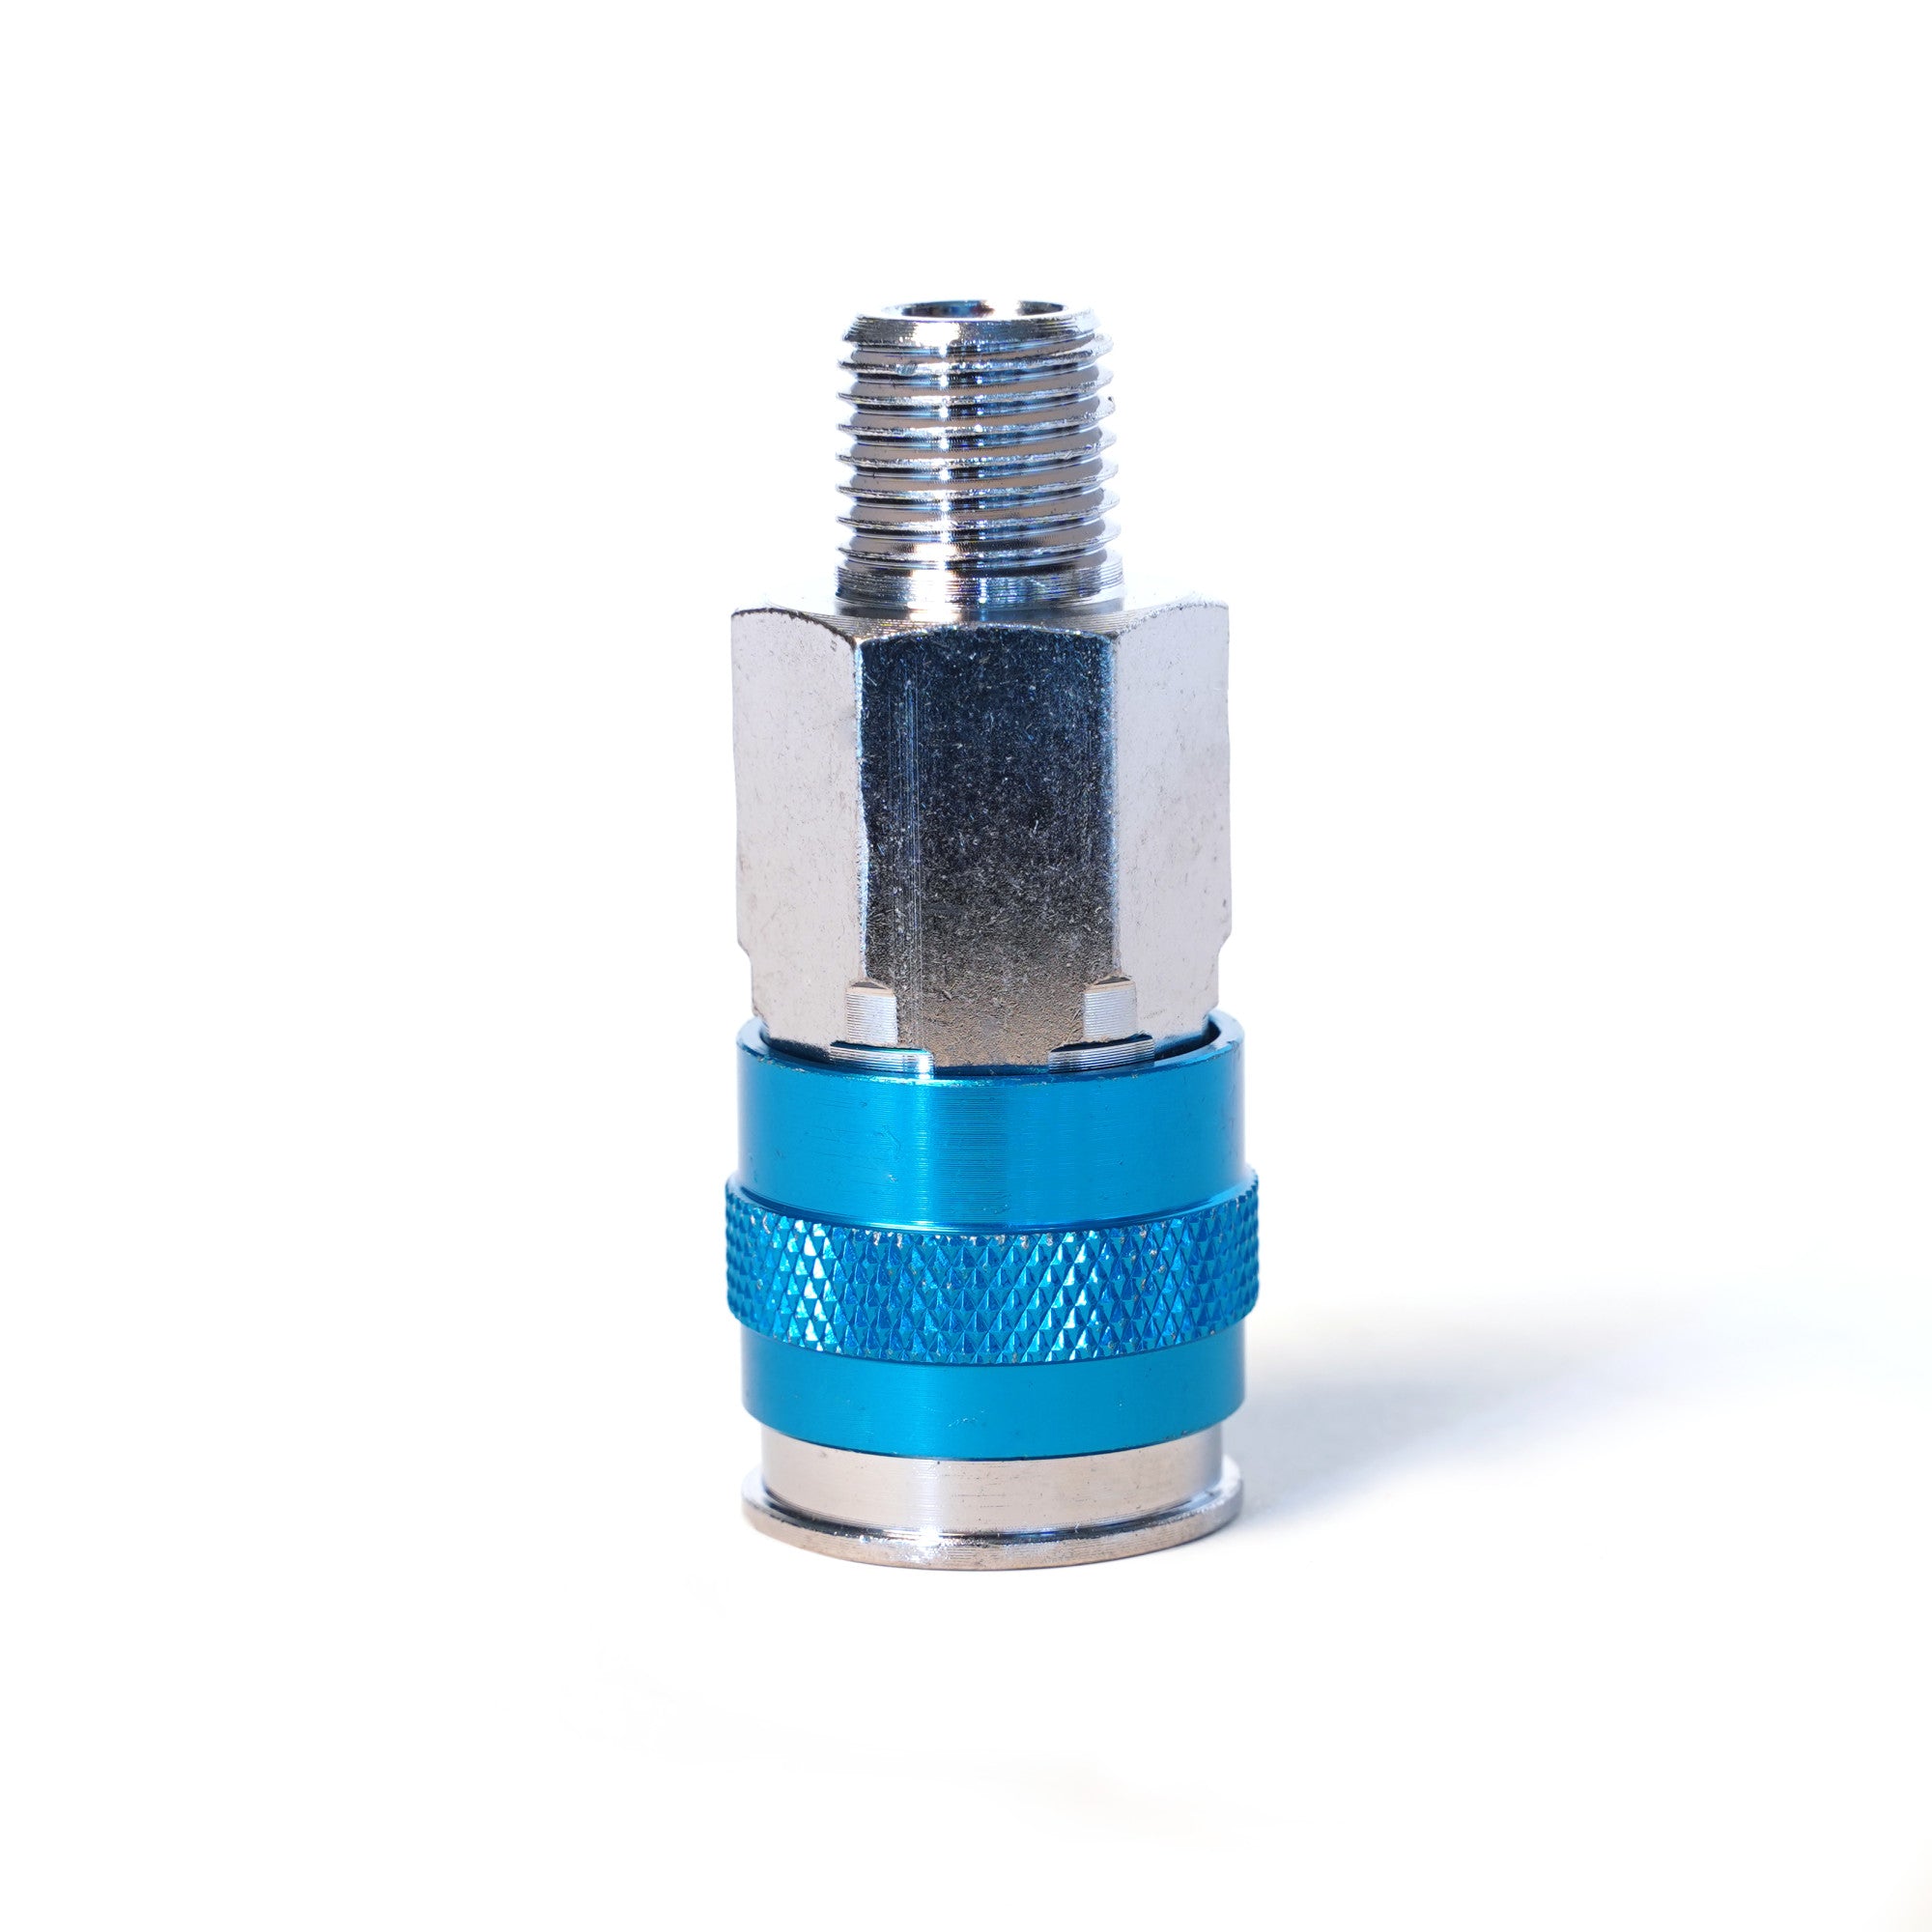 Steelman 1/4-In Quick Disconnect Plug, 1/4-In Male Npt Threads